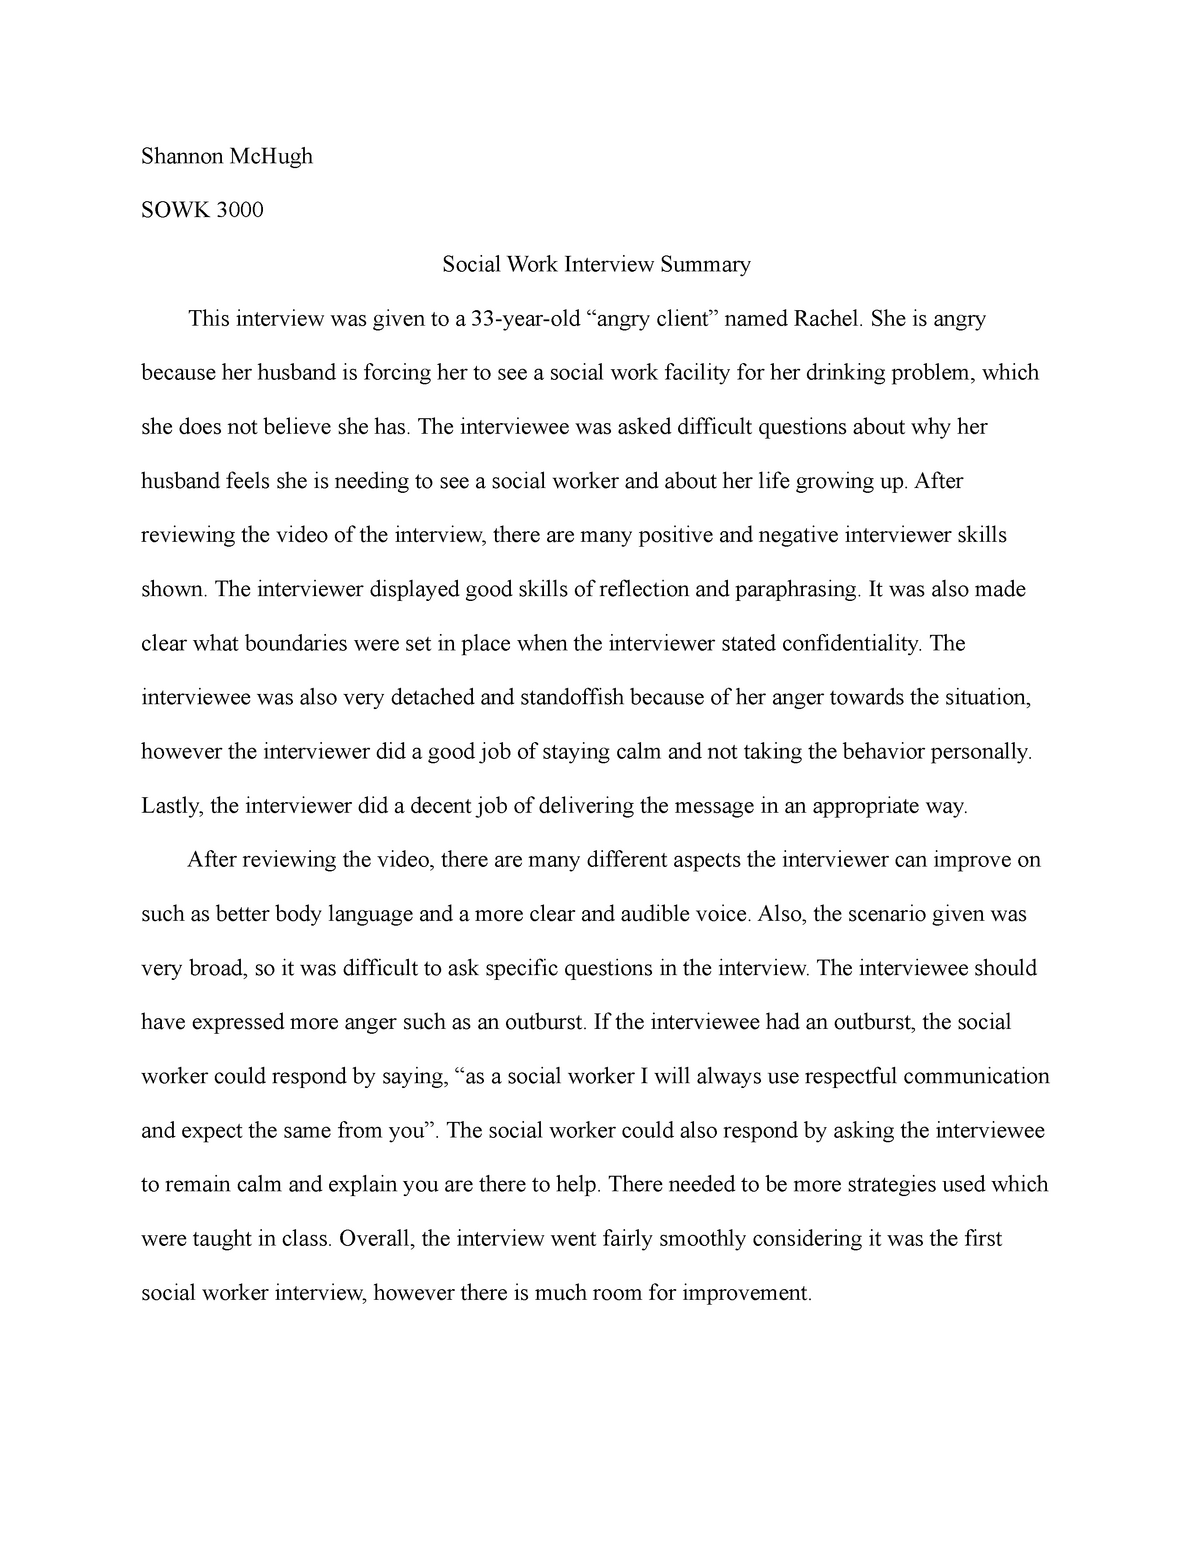 social work interview essay example